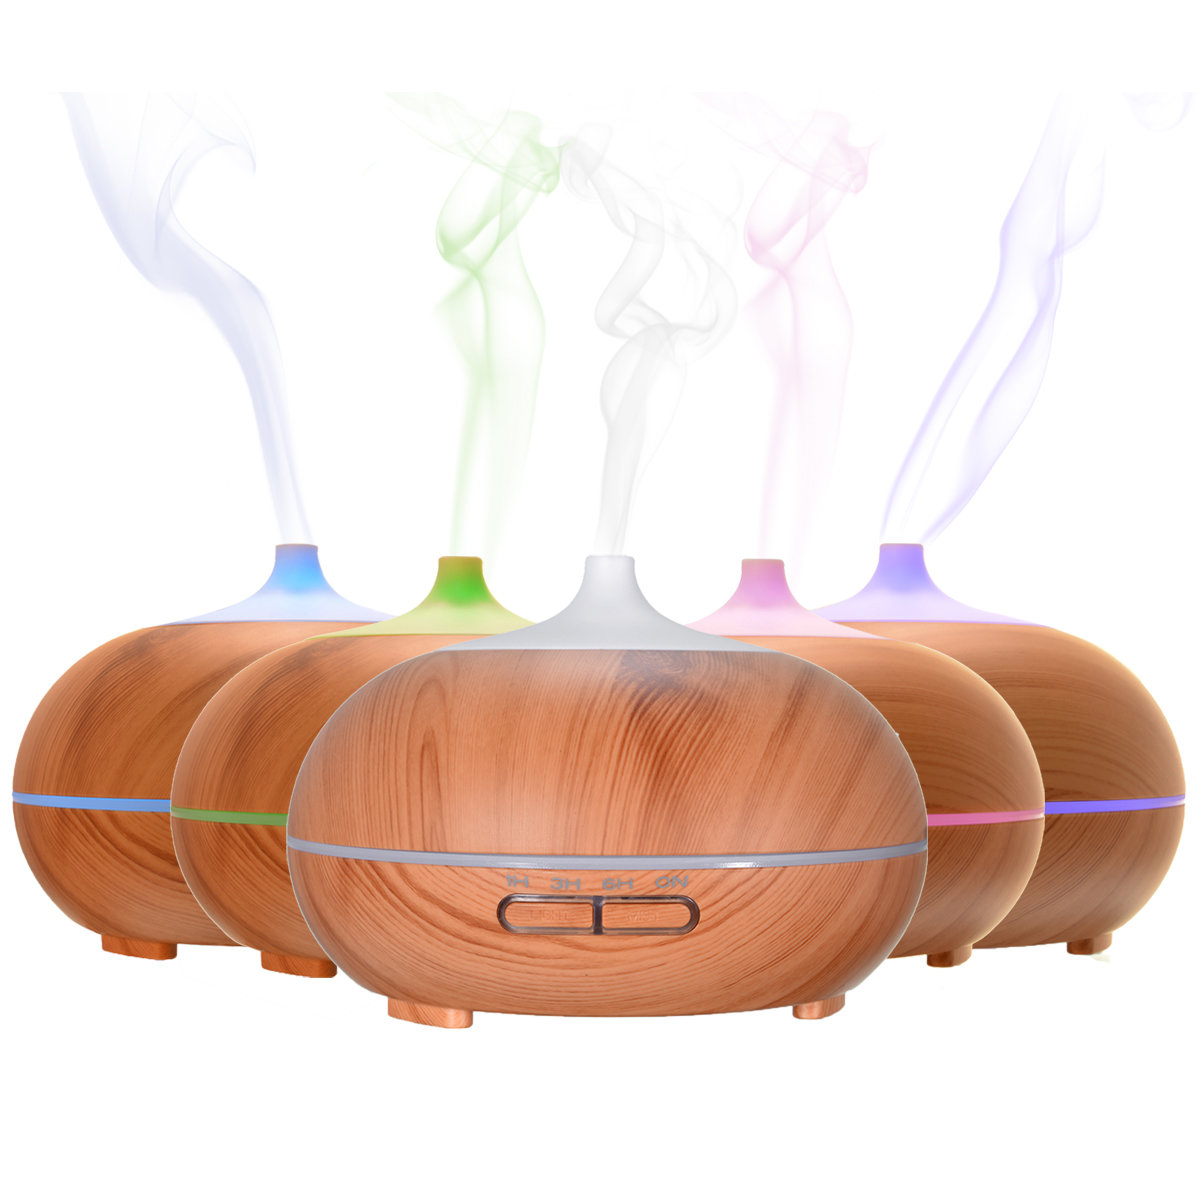 

Creative Humidifier LED Light Color-change Aromatherapy Extension Incense Light-colored Wood Grain, White